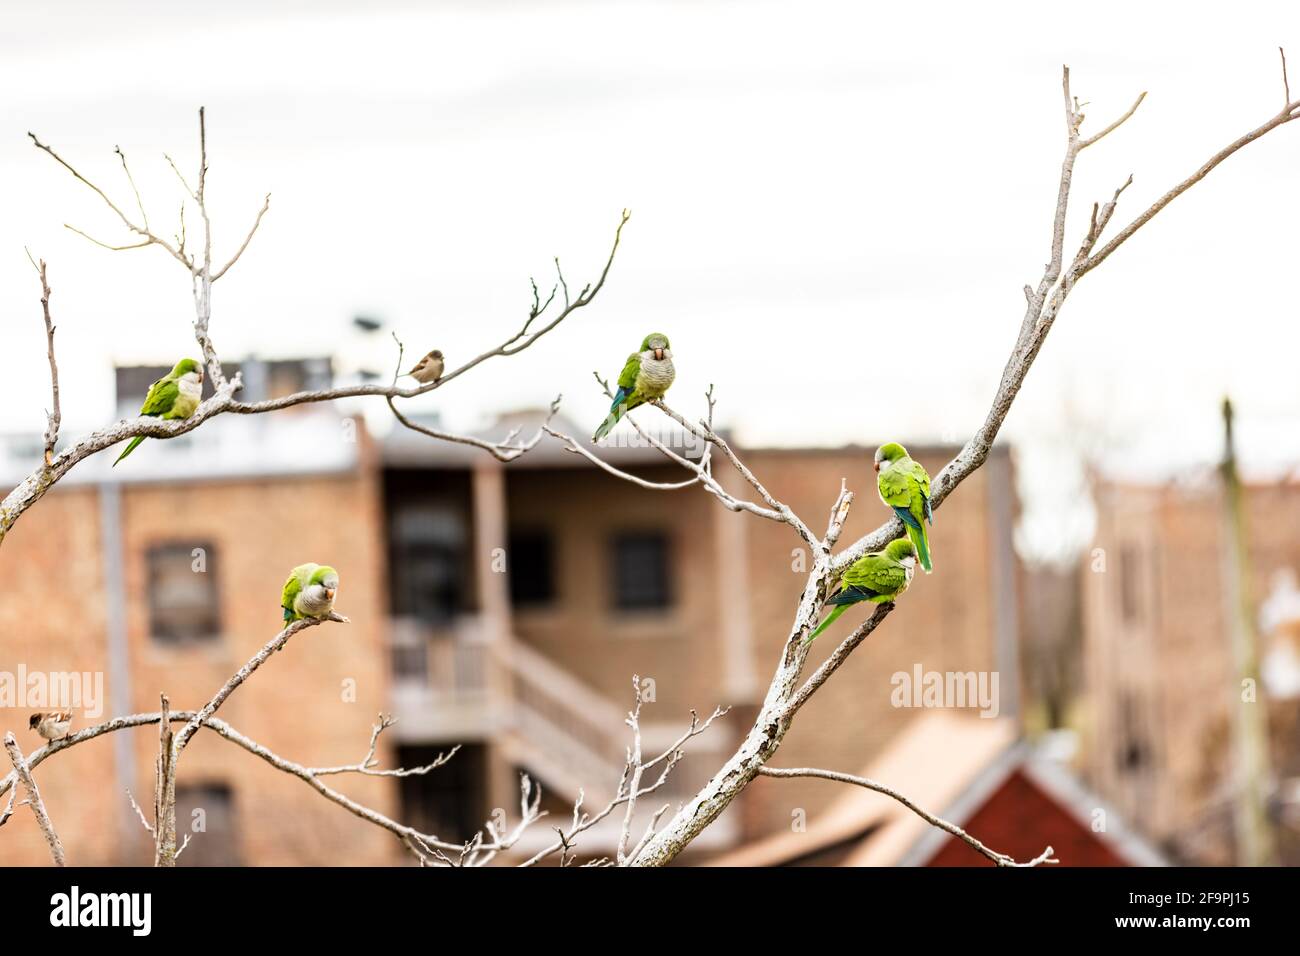 Monk parakeets (Myiopsitta monachus), also known as the Quaker parrot, is a species of true parrot in the family Psittacidae. These are perched in a bare winter tree in Chicago. Stock Photo